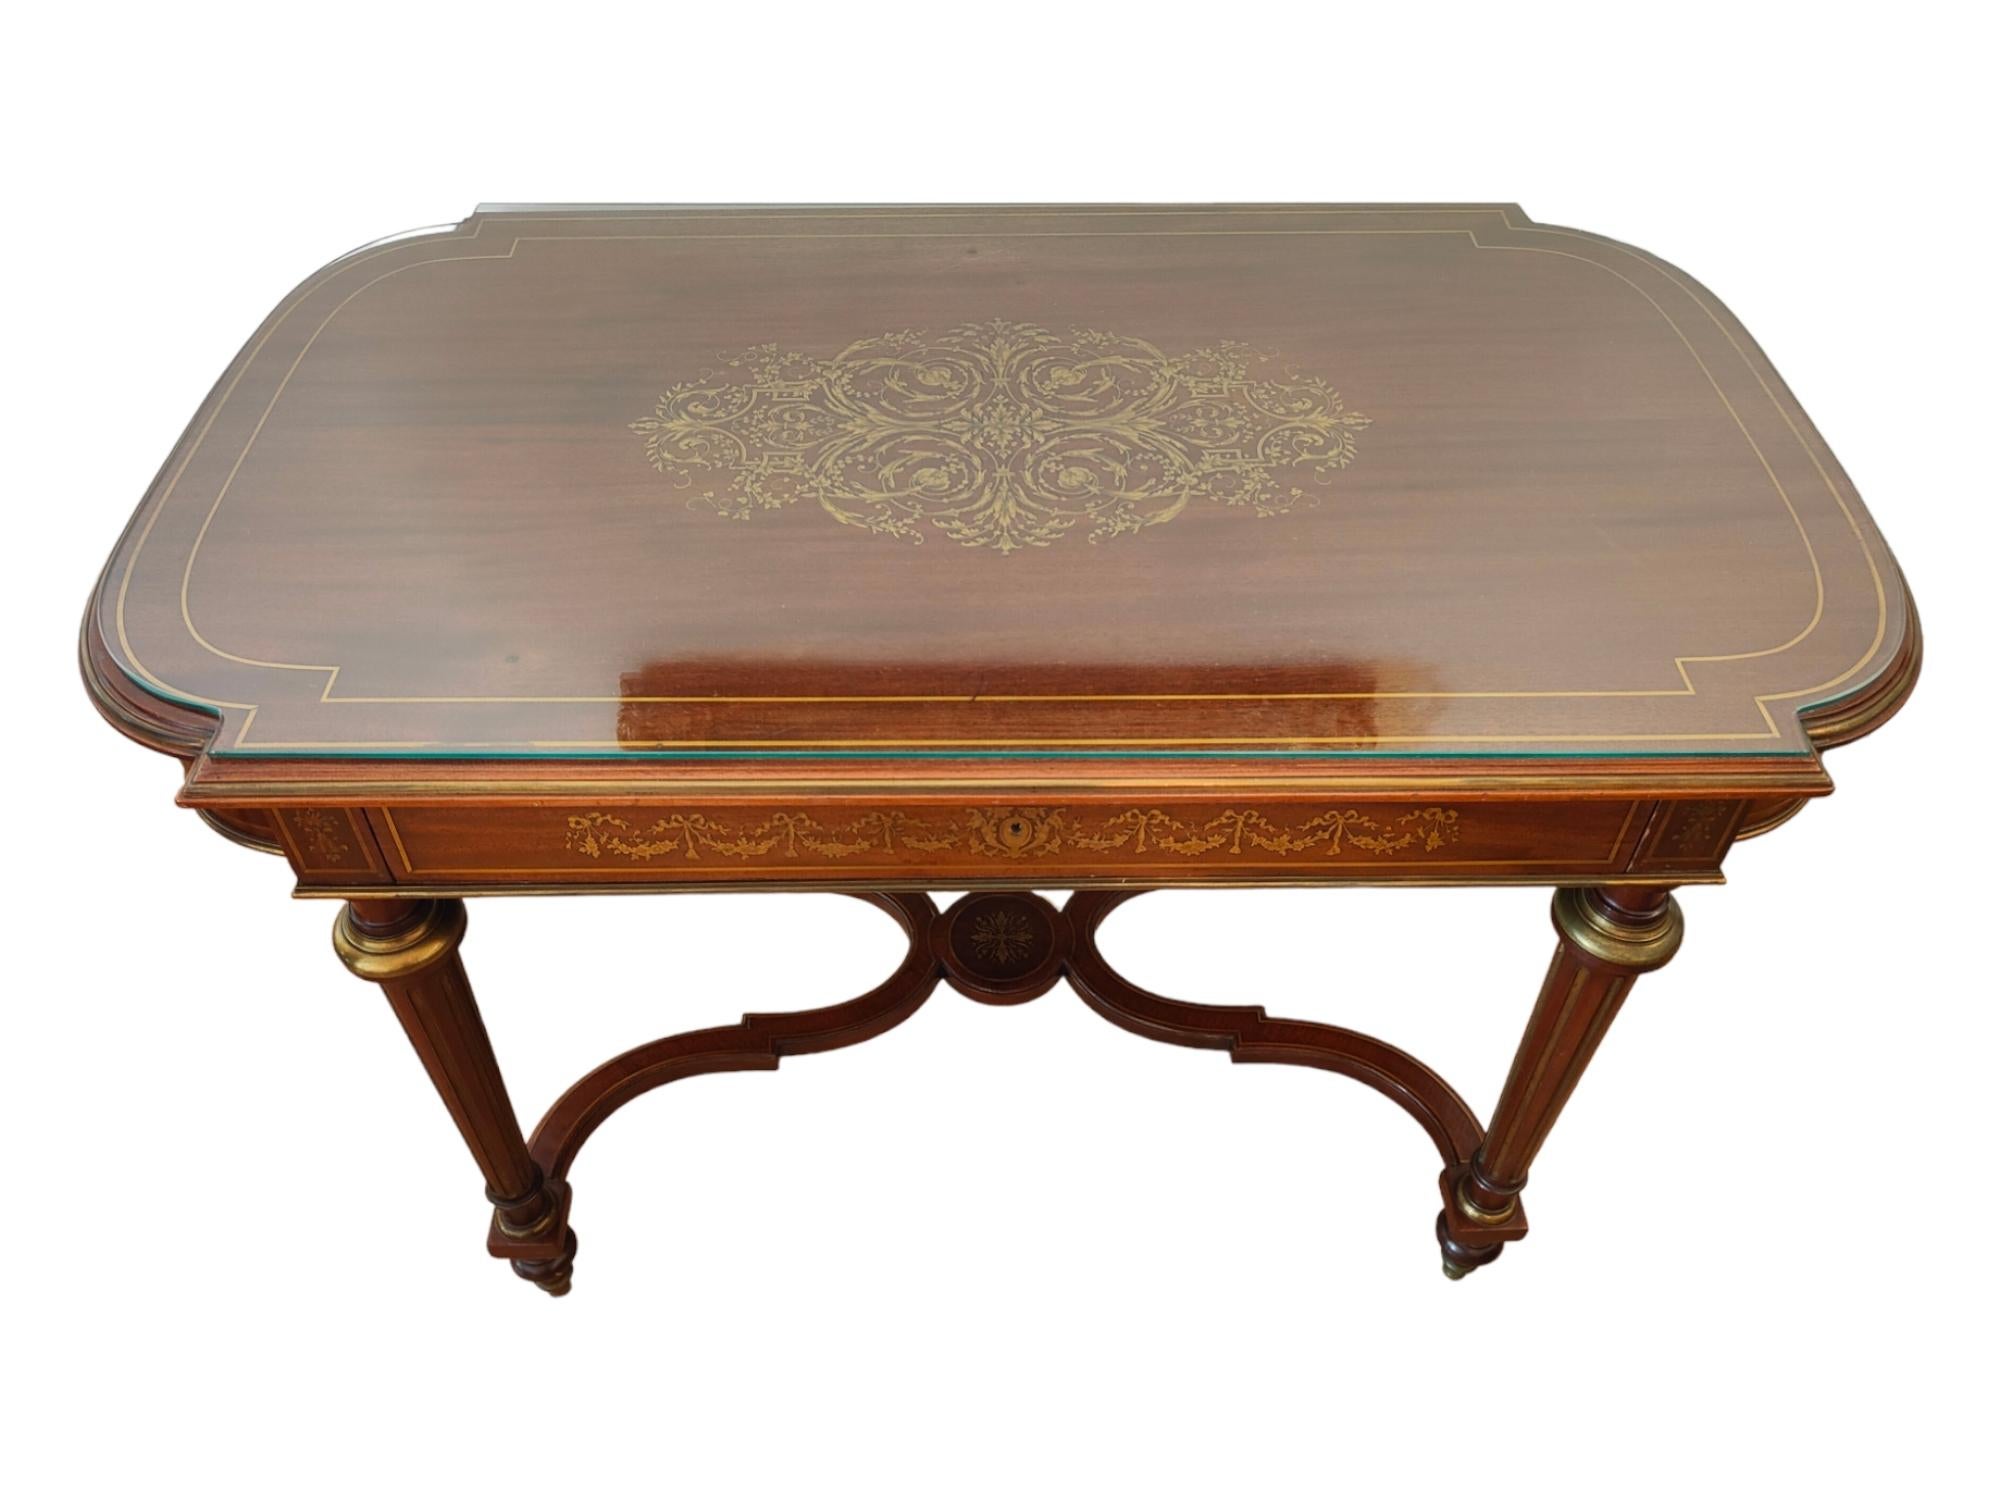 Late 19th Century Elegant French Table with Marquetry from the 19th Century For Sale